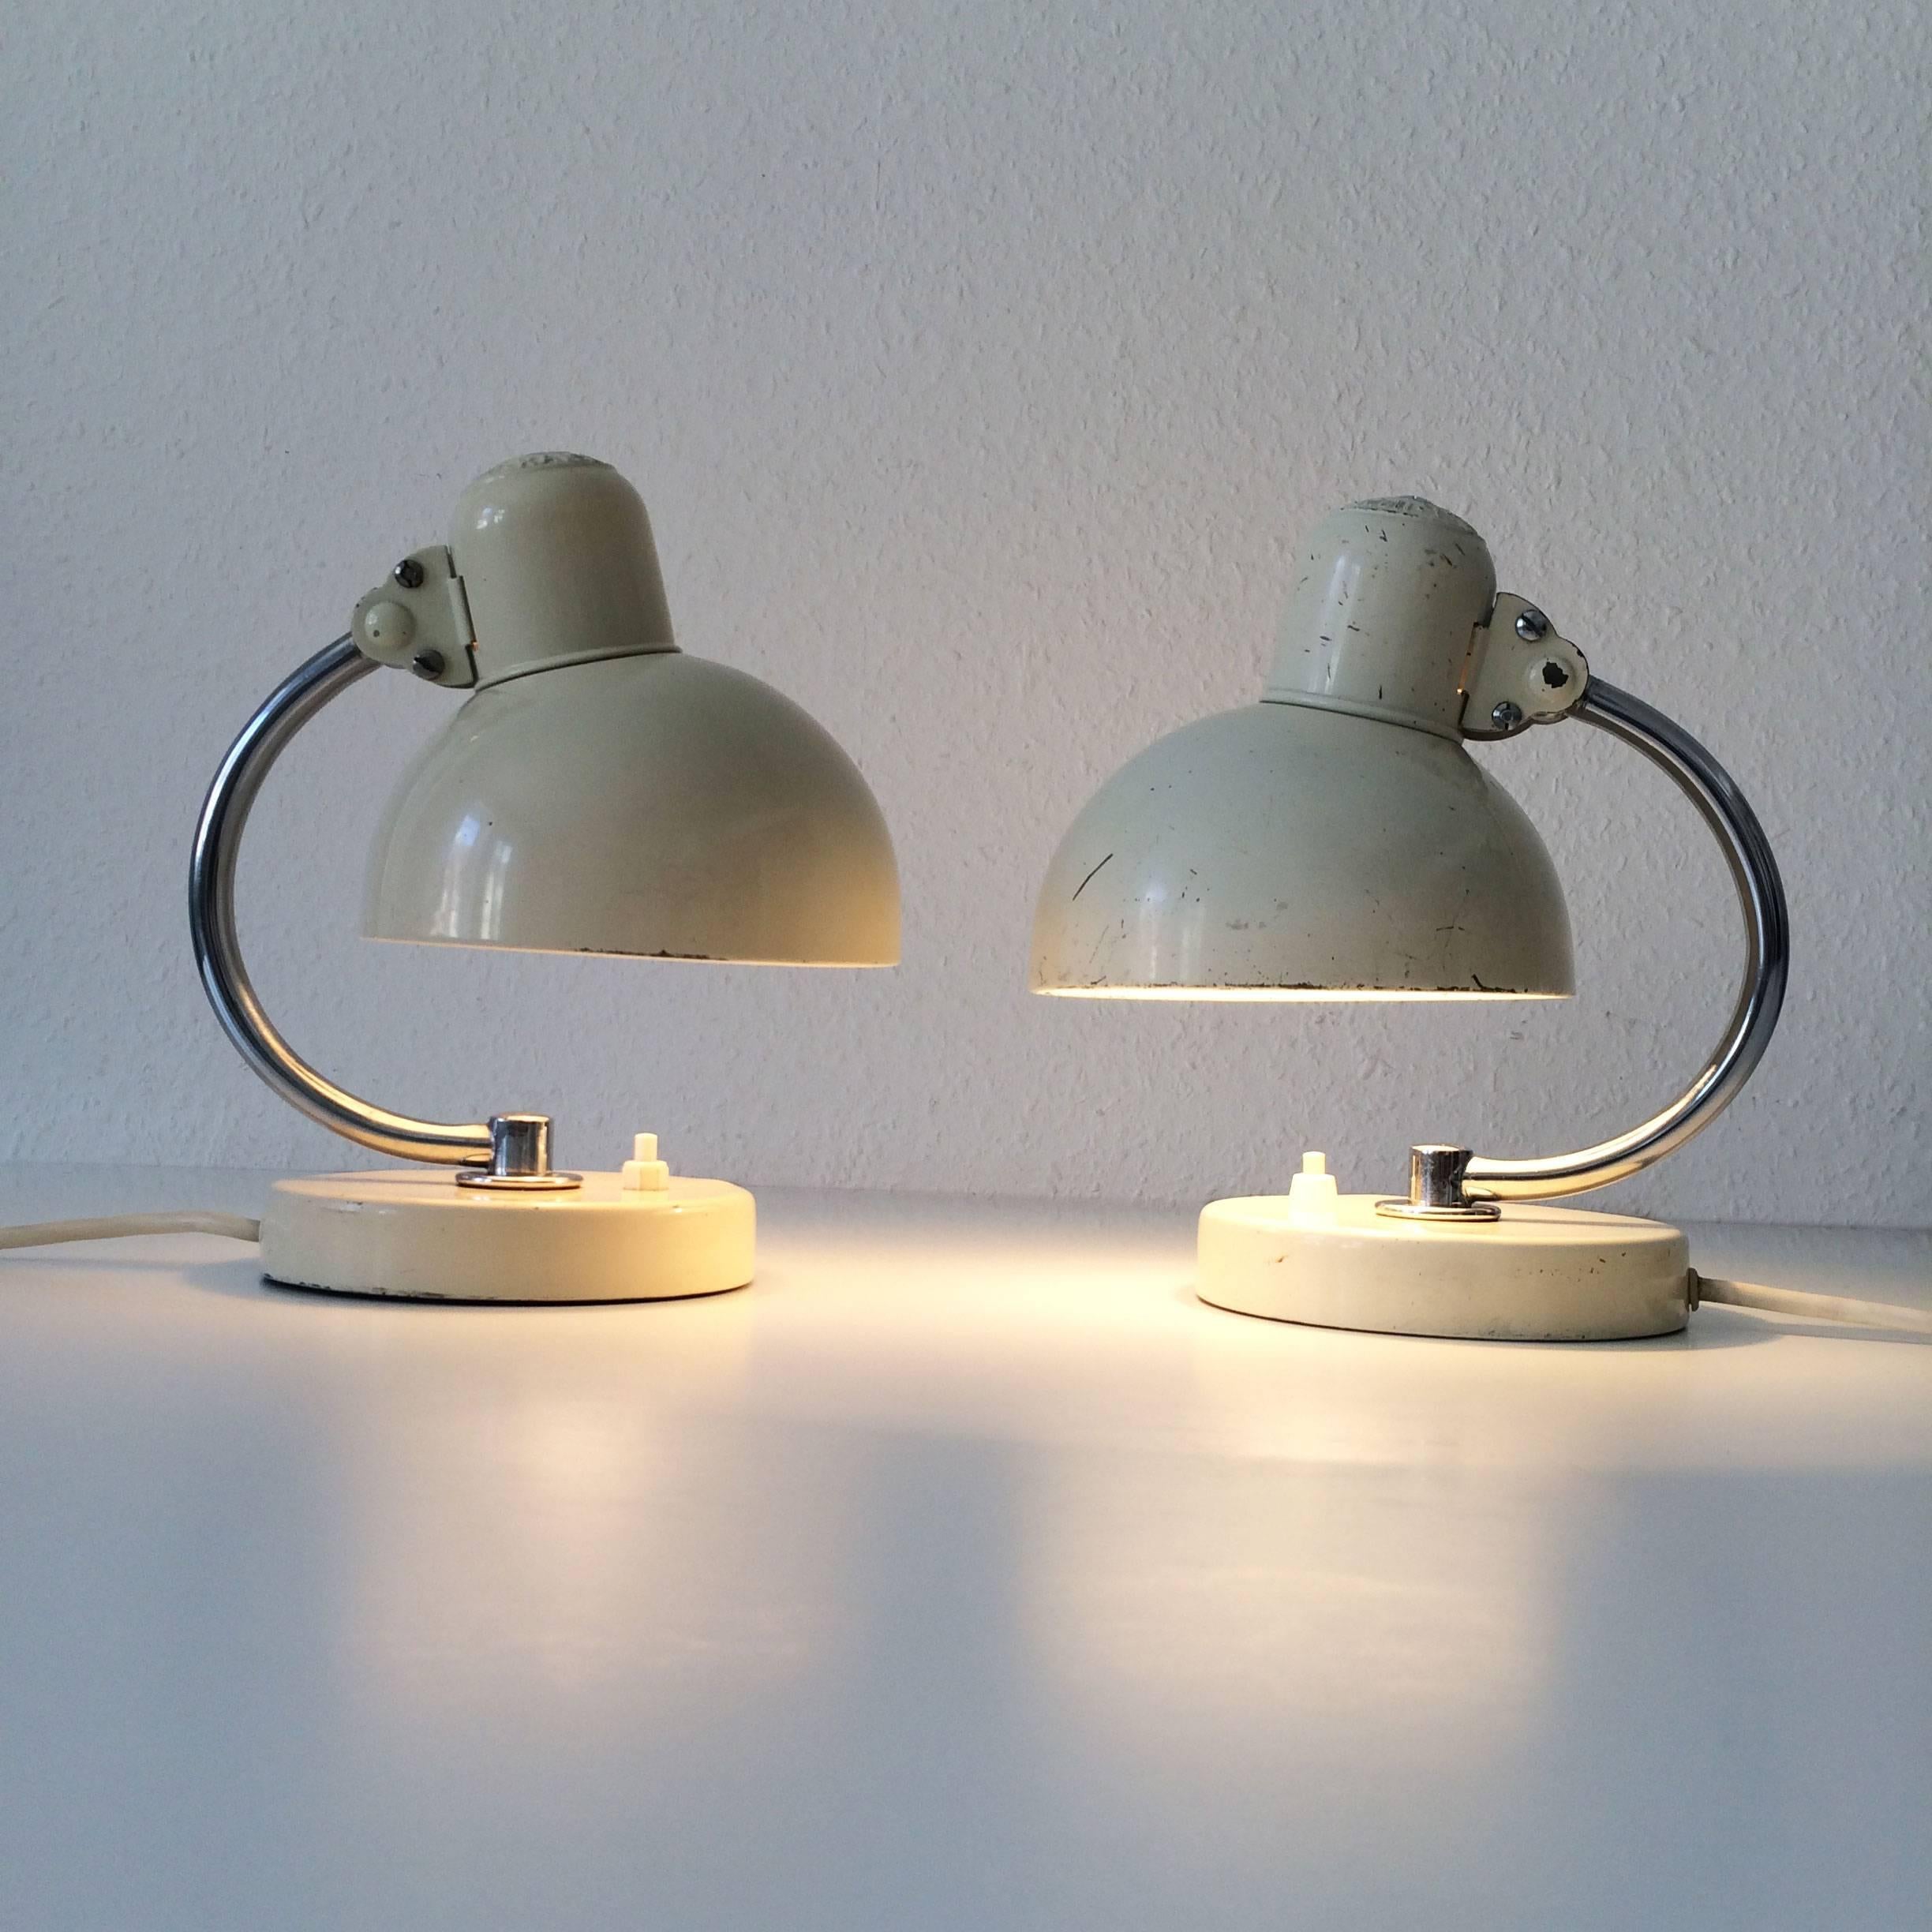 German Bauhaus Bedside Table Lamps Kaiser Idell 6722 by Christian Dell, 1930s